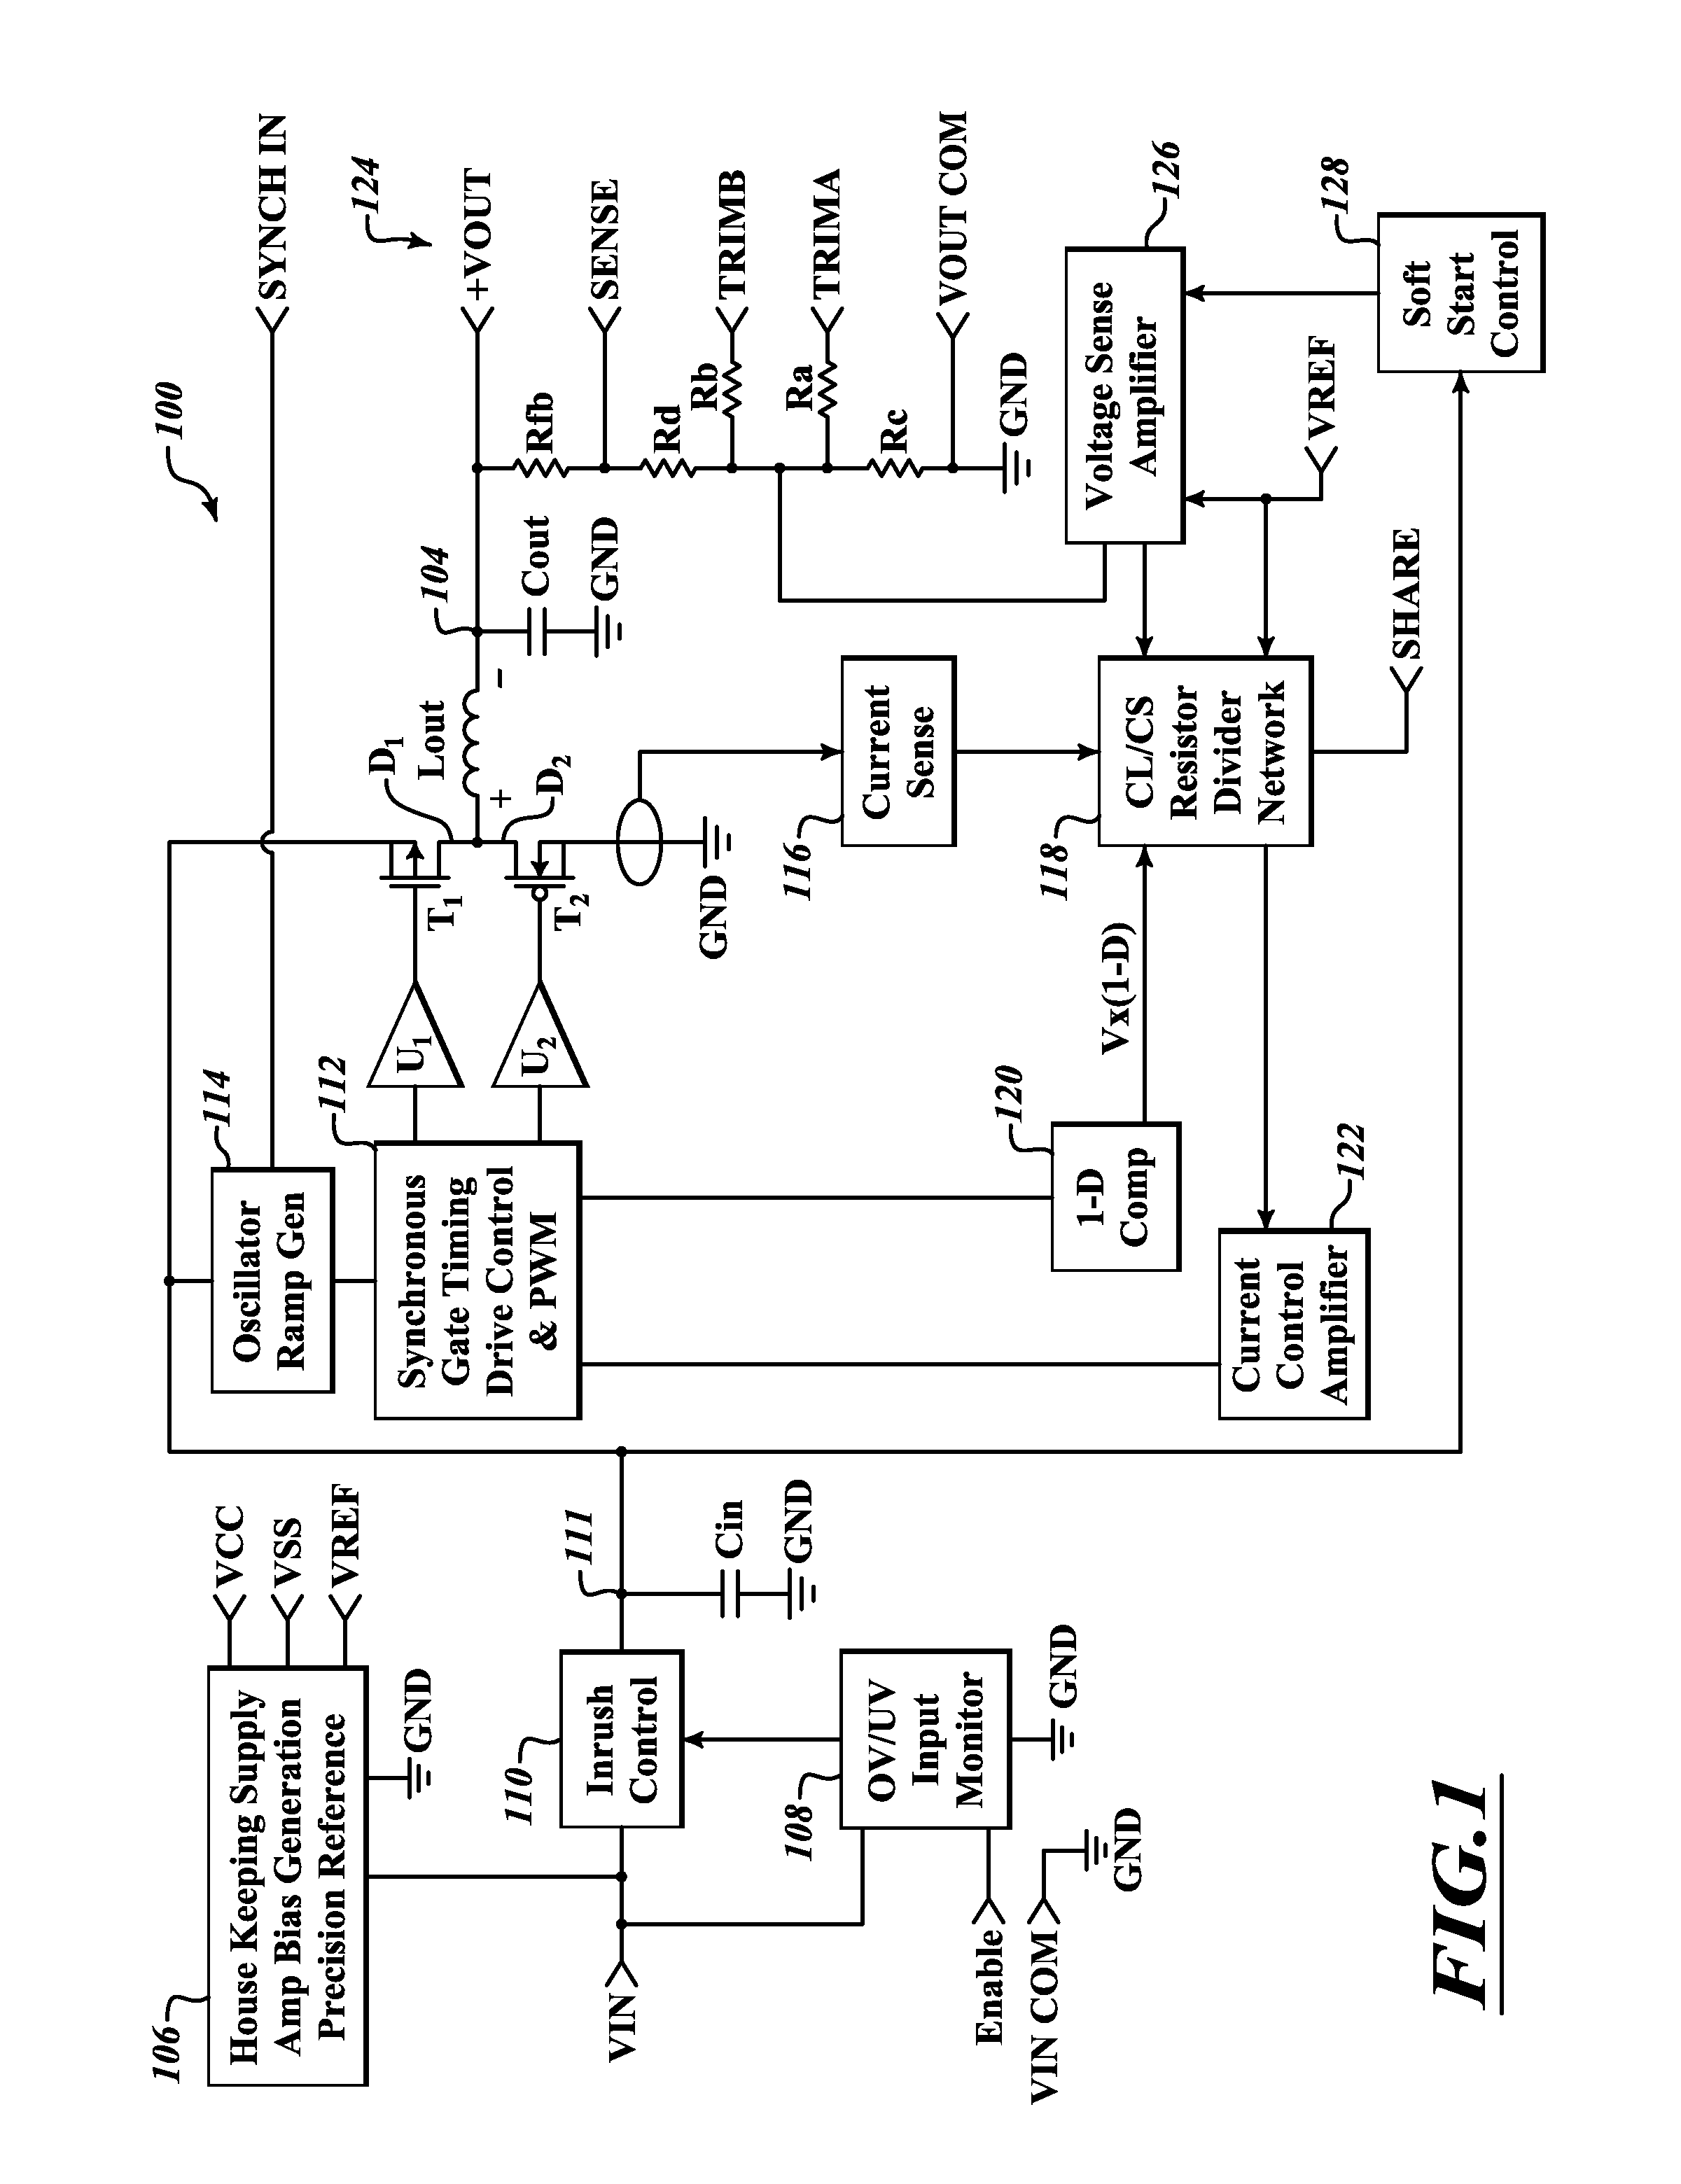 Input control apparatus and method with inrush current, under and over voltage handling